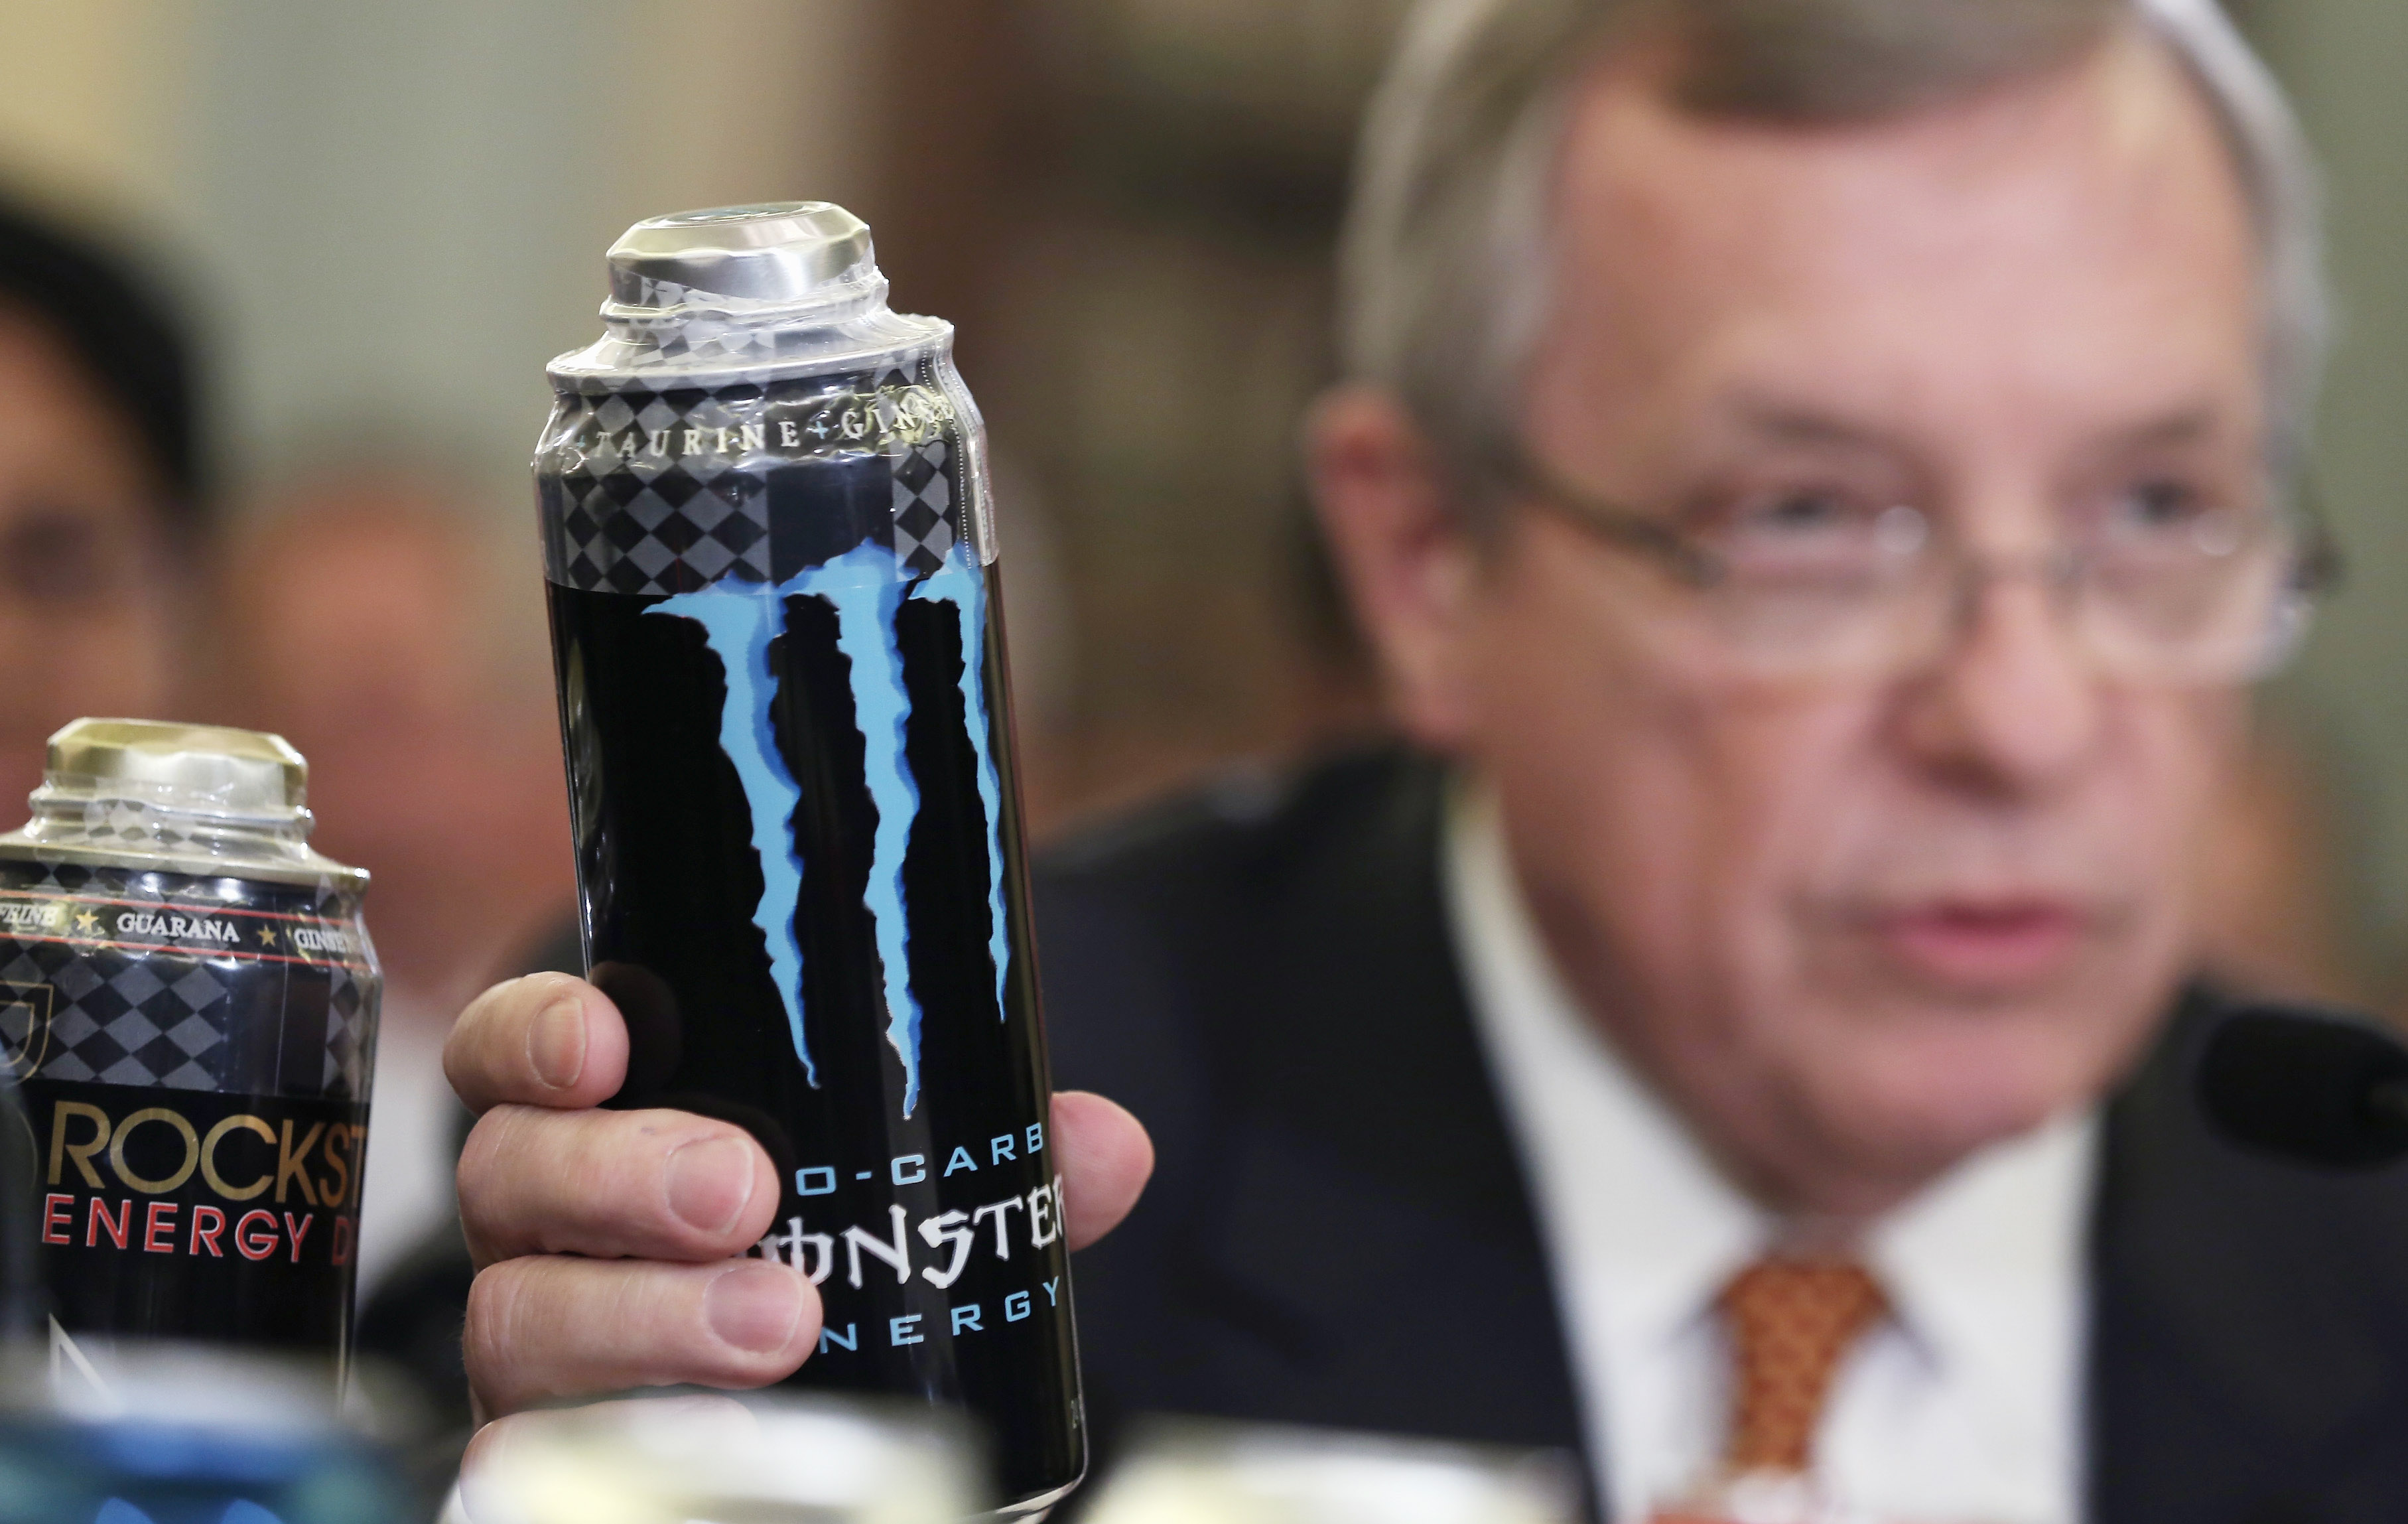 U.S. Senate Majority Whip Sen. Richard Durbin (D-IL) holds up a can of Monster energy drink as he testifies during a hearing before the Senate Commerce, Science and Transportation Committee July 31, 2013 on Capitol Hill in Washington, DC. (Joe Raedle—Getty Images)